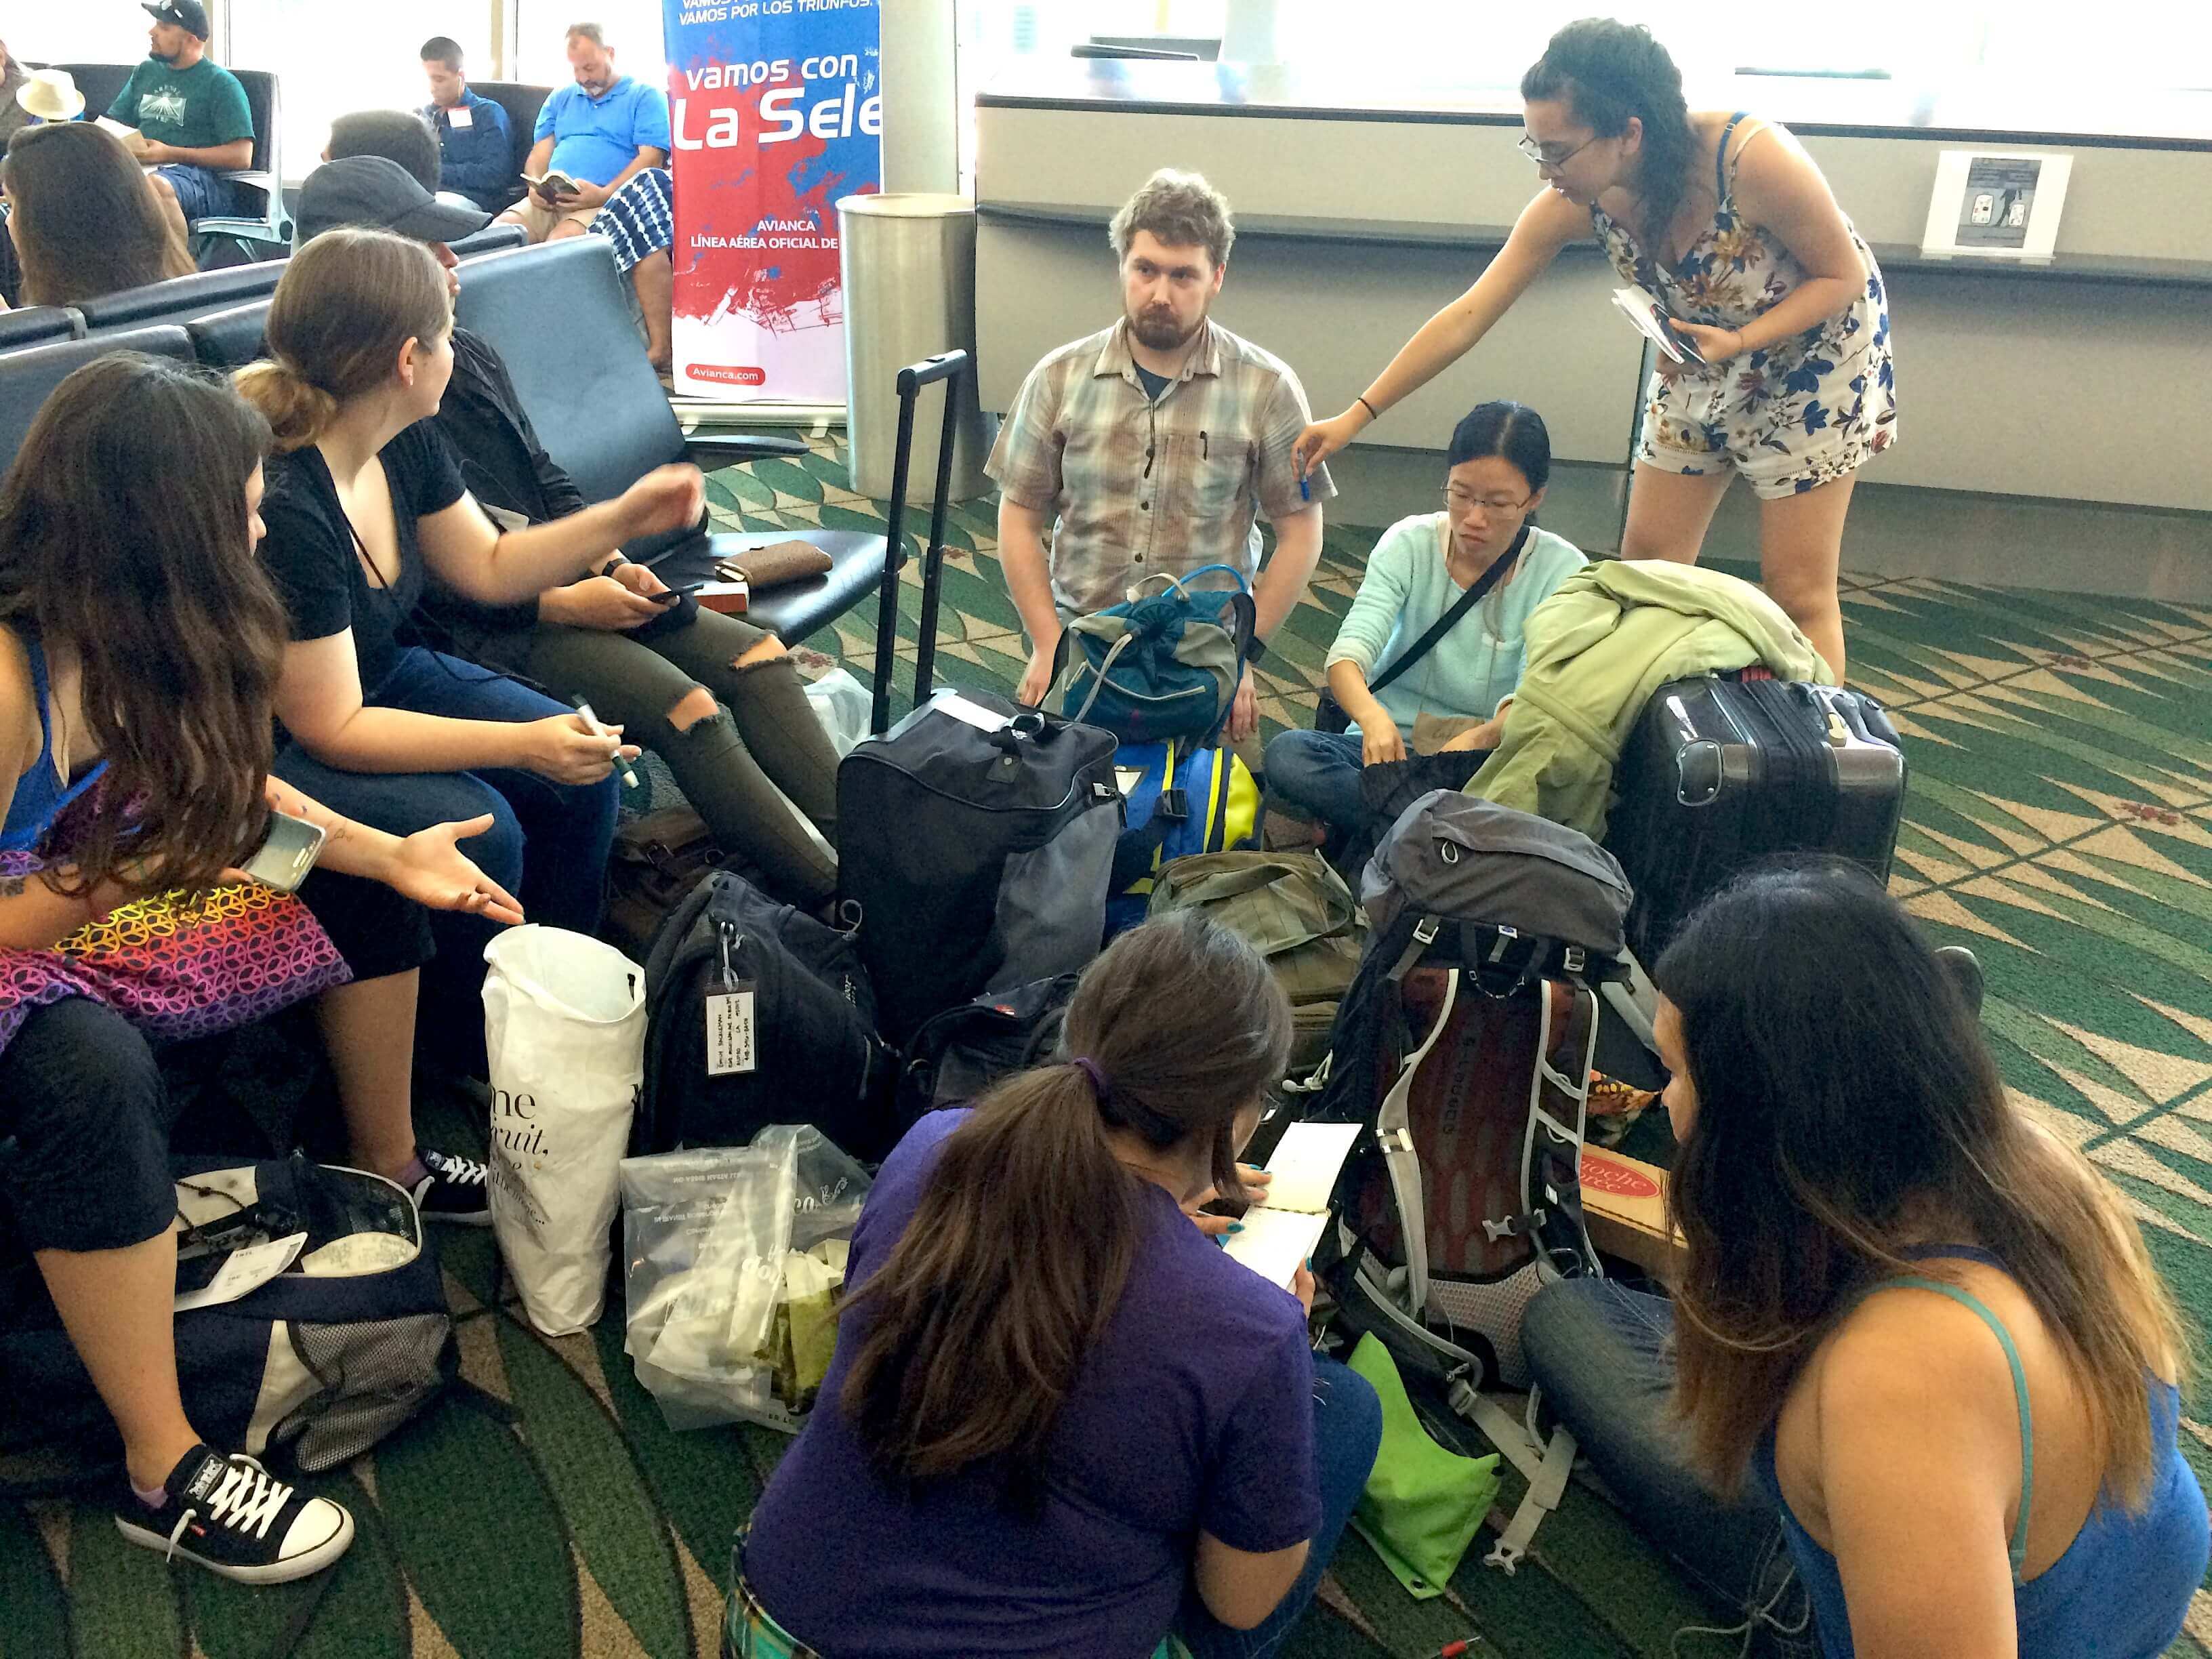 Students in the SFO airport preparing for a flight to Costa Rica.